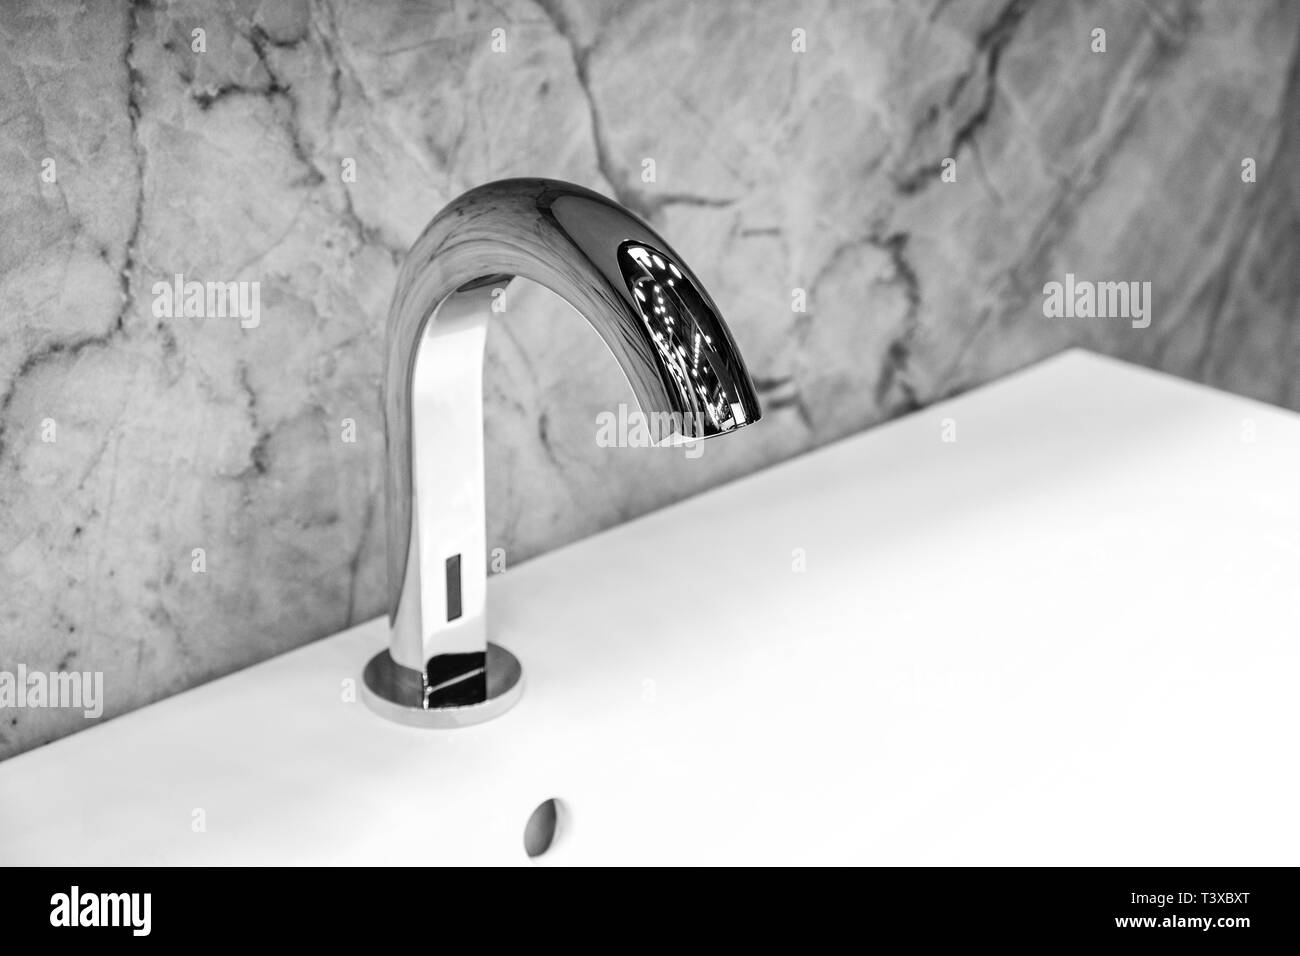 Luxury infrared faucet mixer on a white sink in a beautiful white and gray bathroom Stock Photo